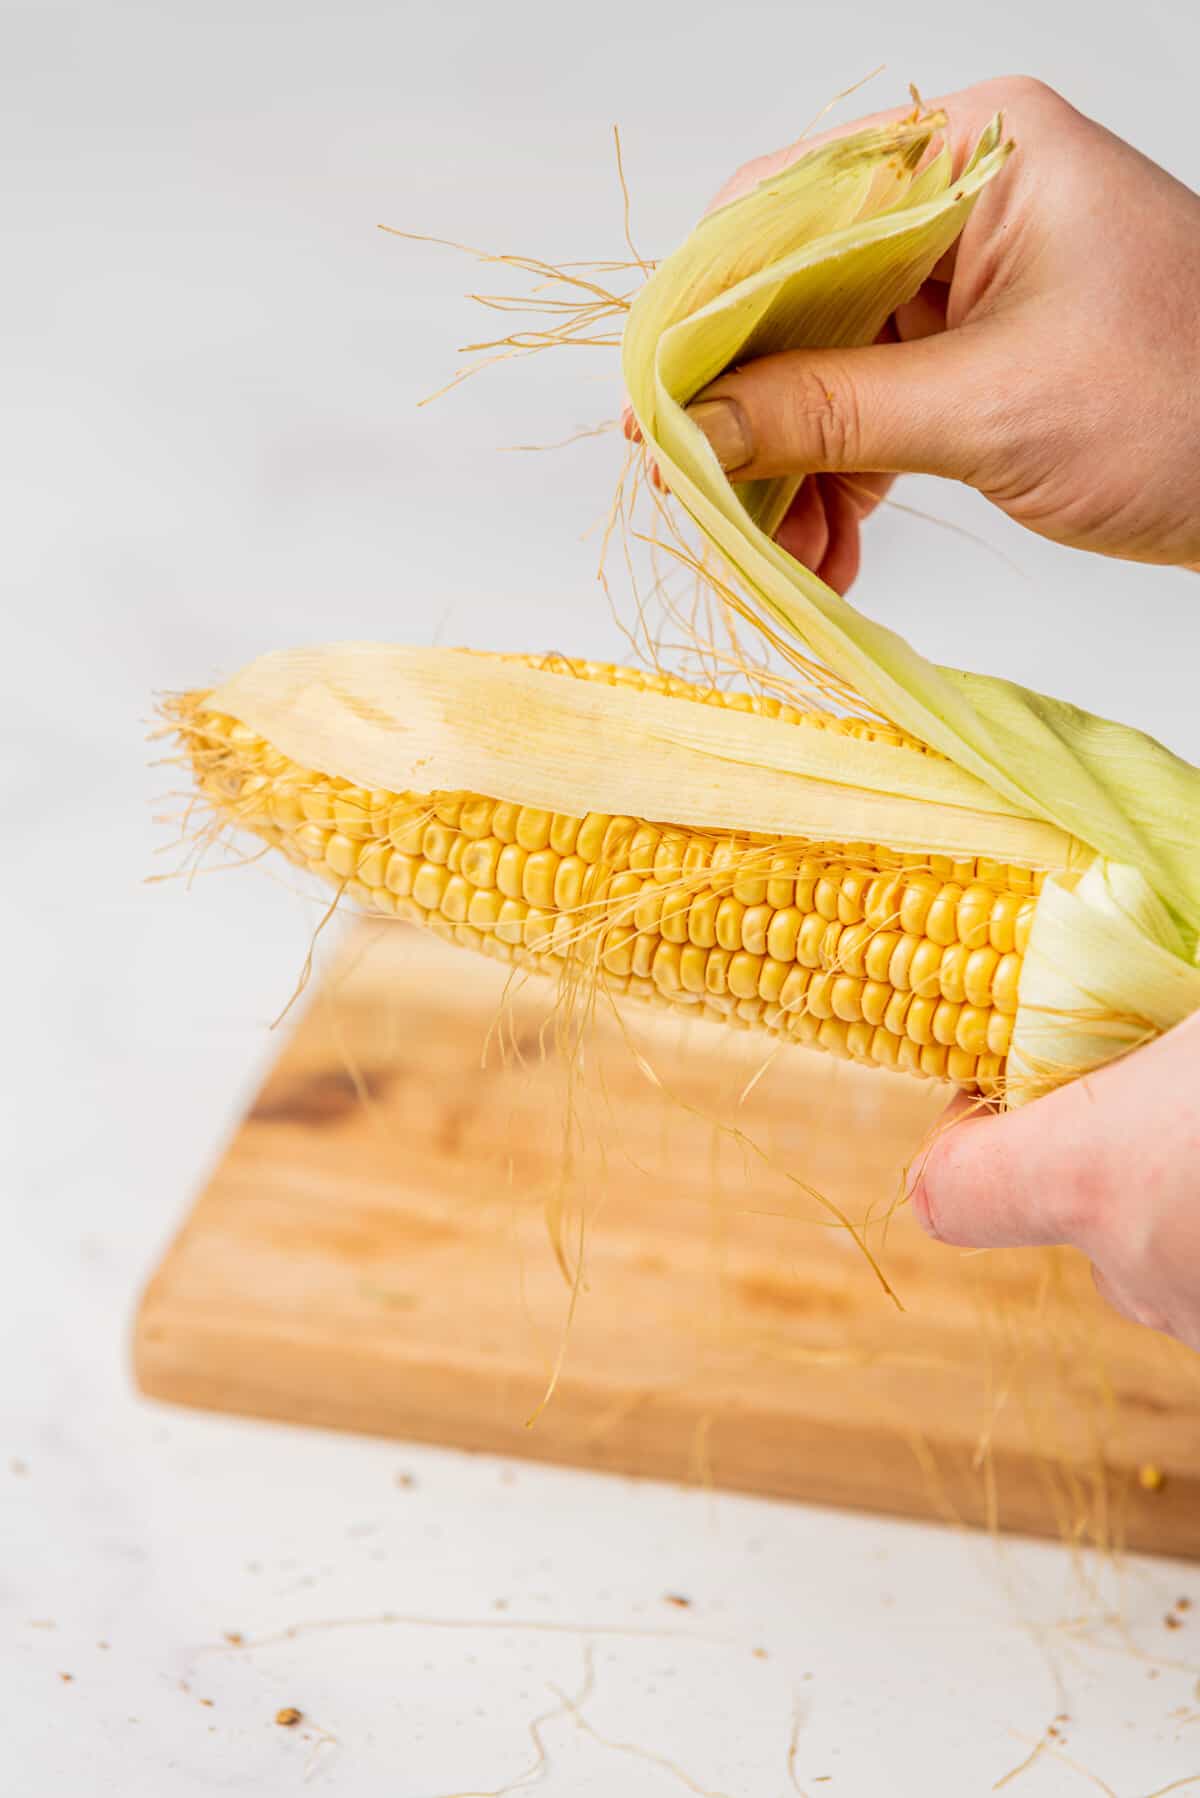 An image of the process of removing corn husk and silk on a sweet corn